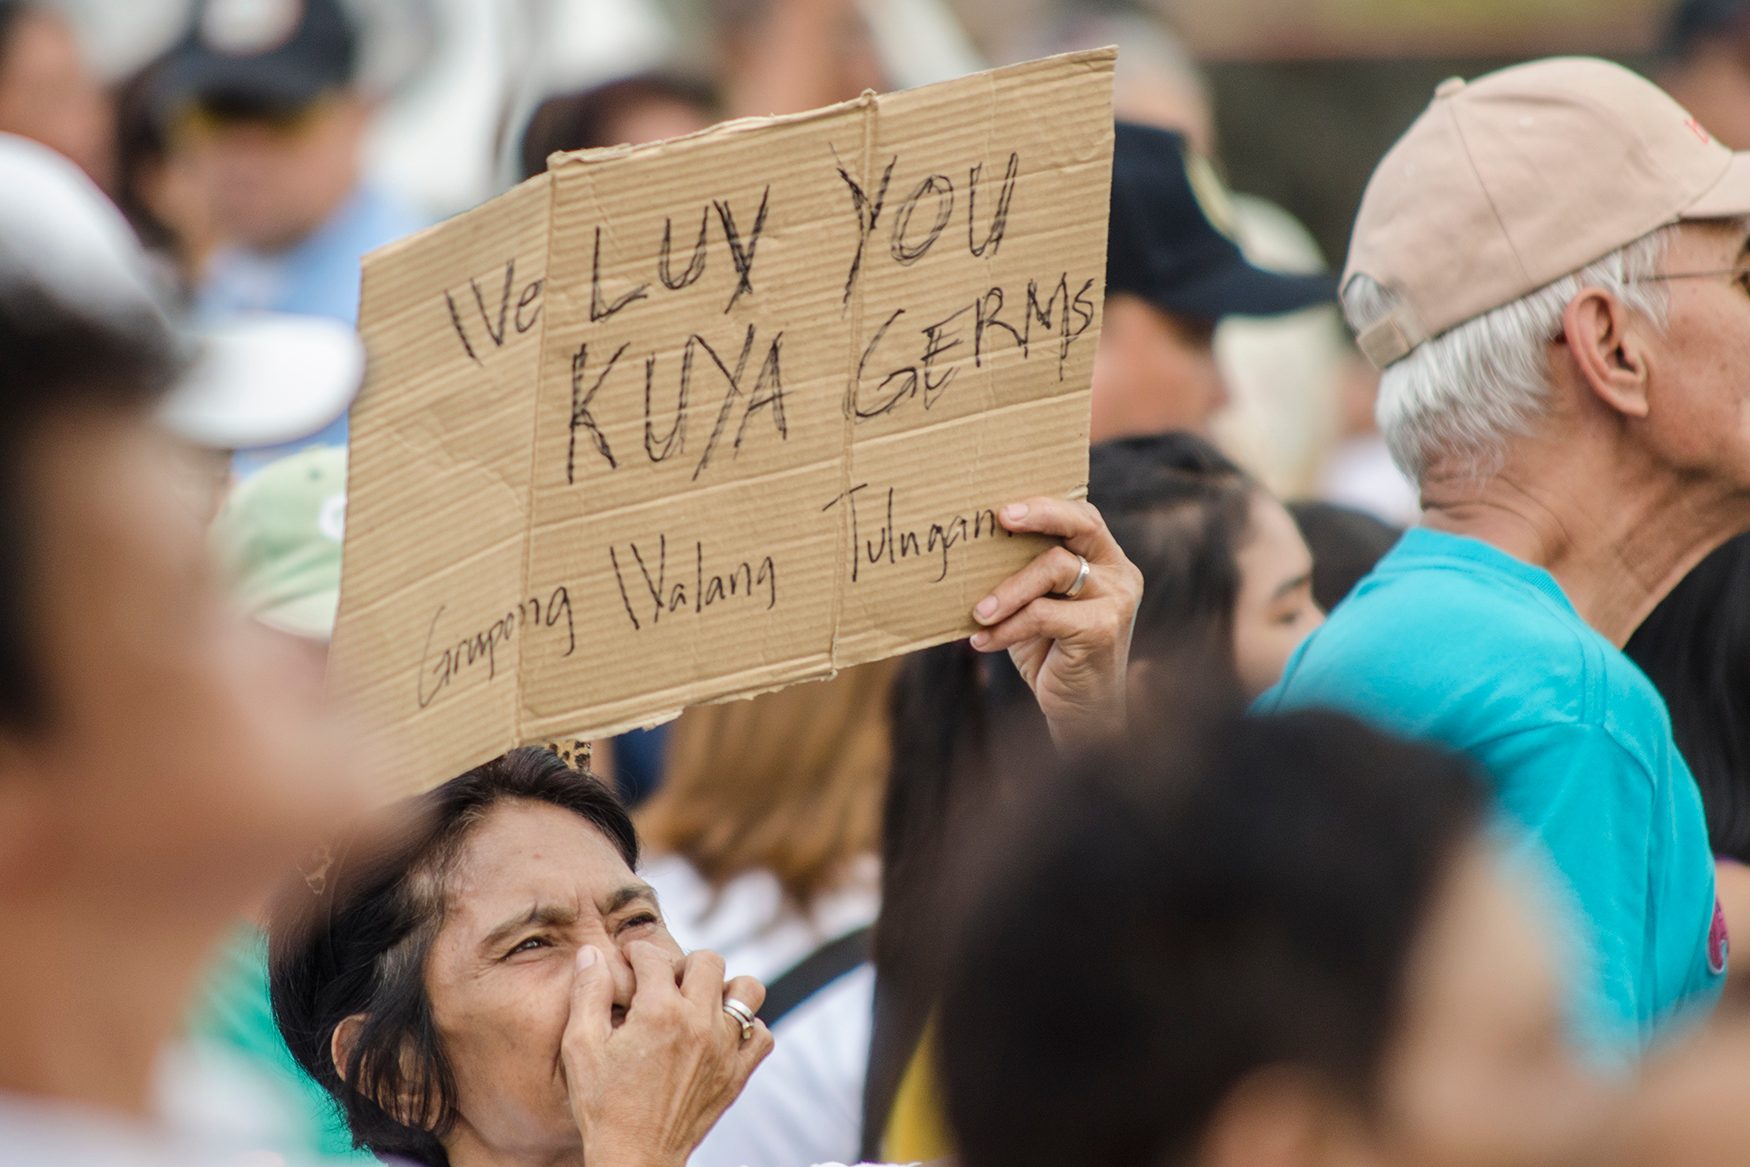 WE LOVE YOU. Fans paid their last respects at Kuya Germs' funeral as well. Photo by Rob Reyes/Rappler  